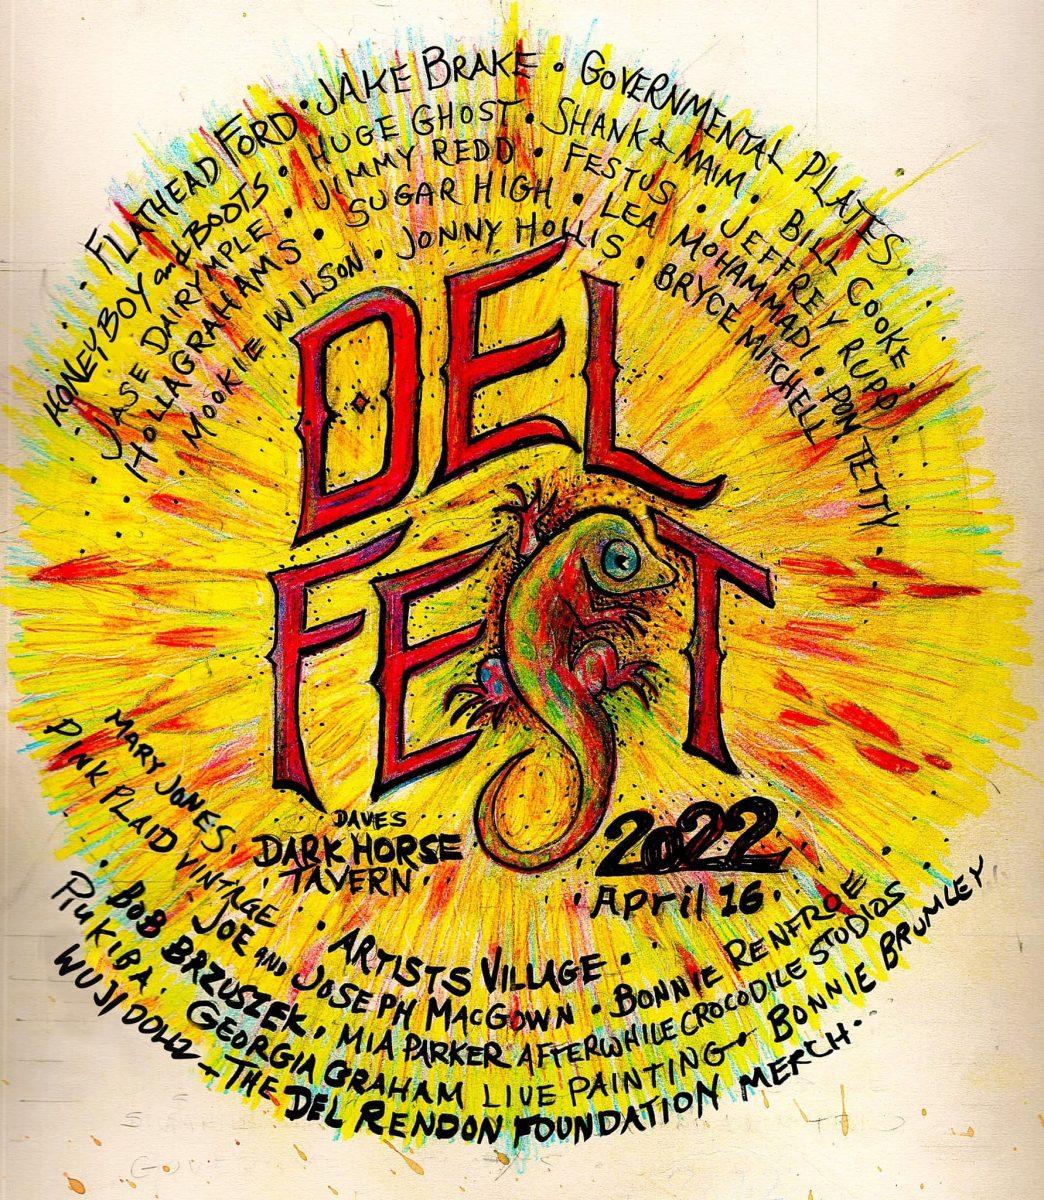 The spirit of Del Rendon lives on through the DelFest. The Del Rendon Foundation, founded by family and friends of Rendon, sponsors the event to support local and regional artists